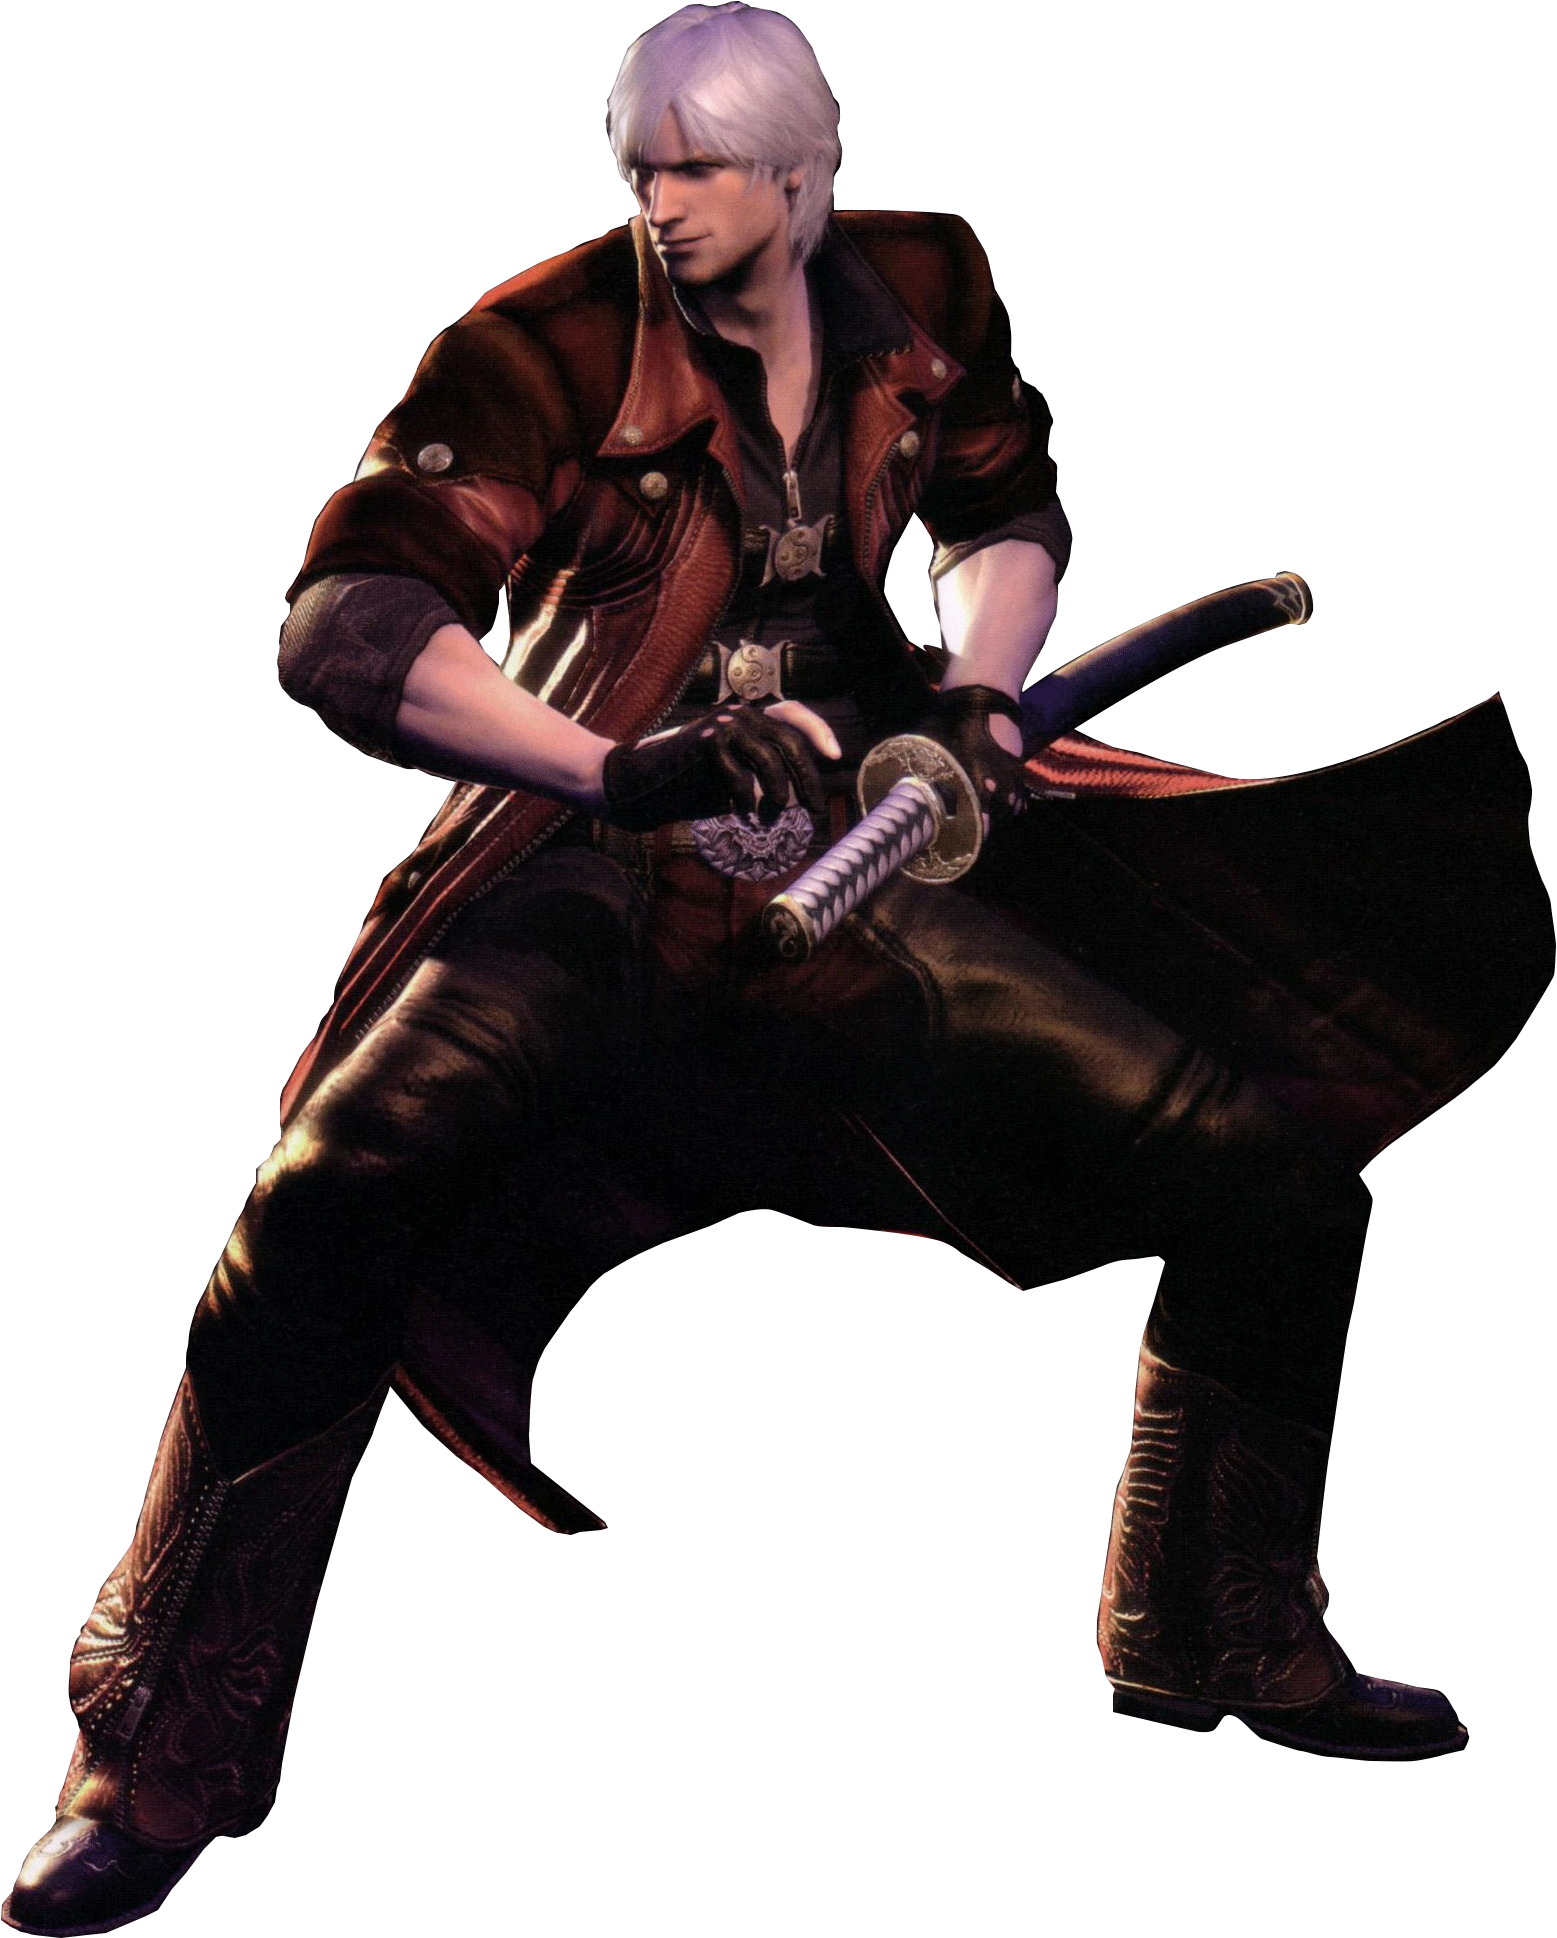 Download Devil May Cry Hd HQ PNG Image